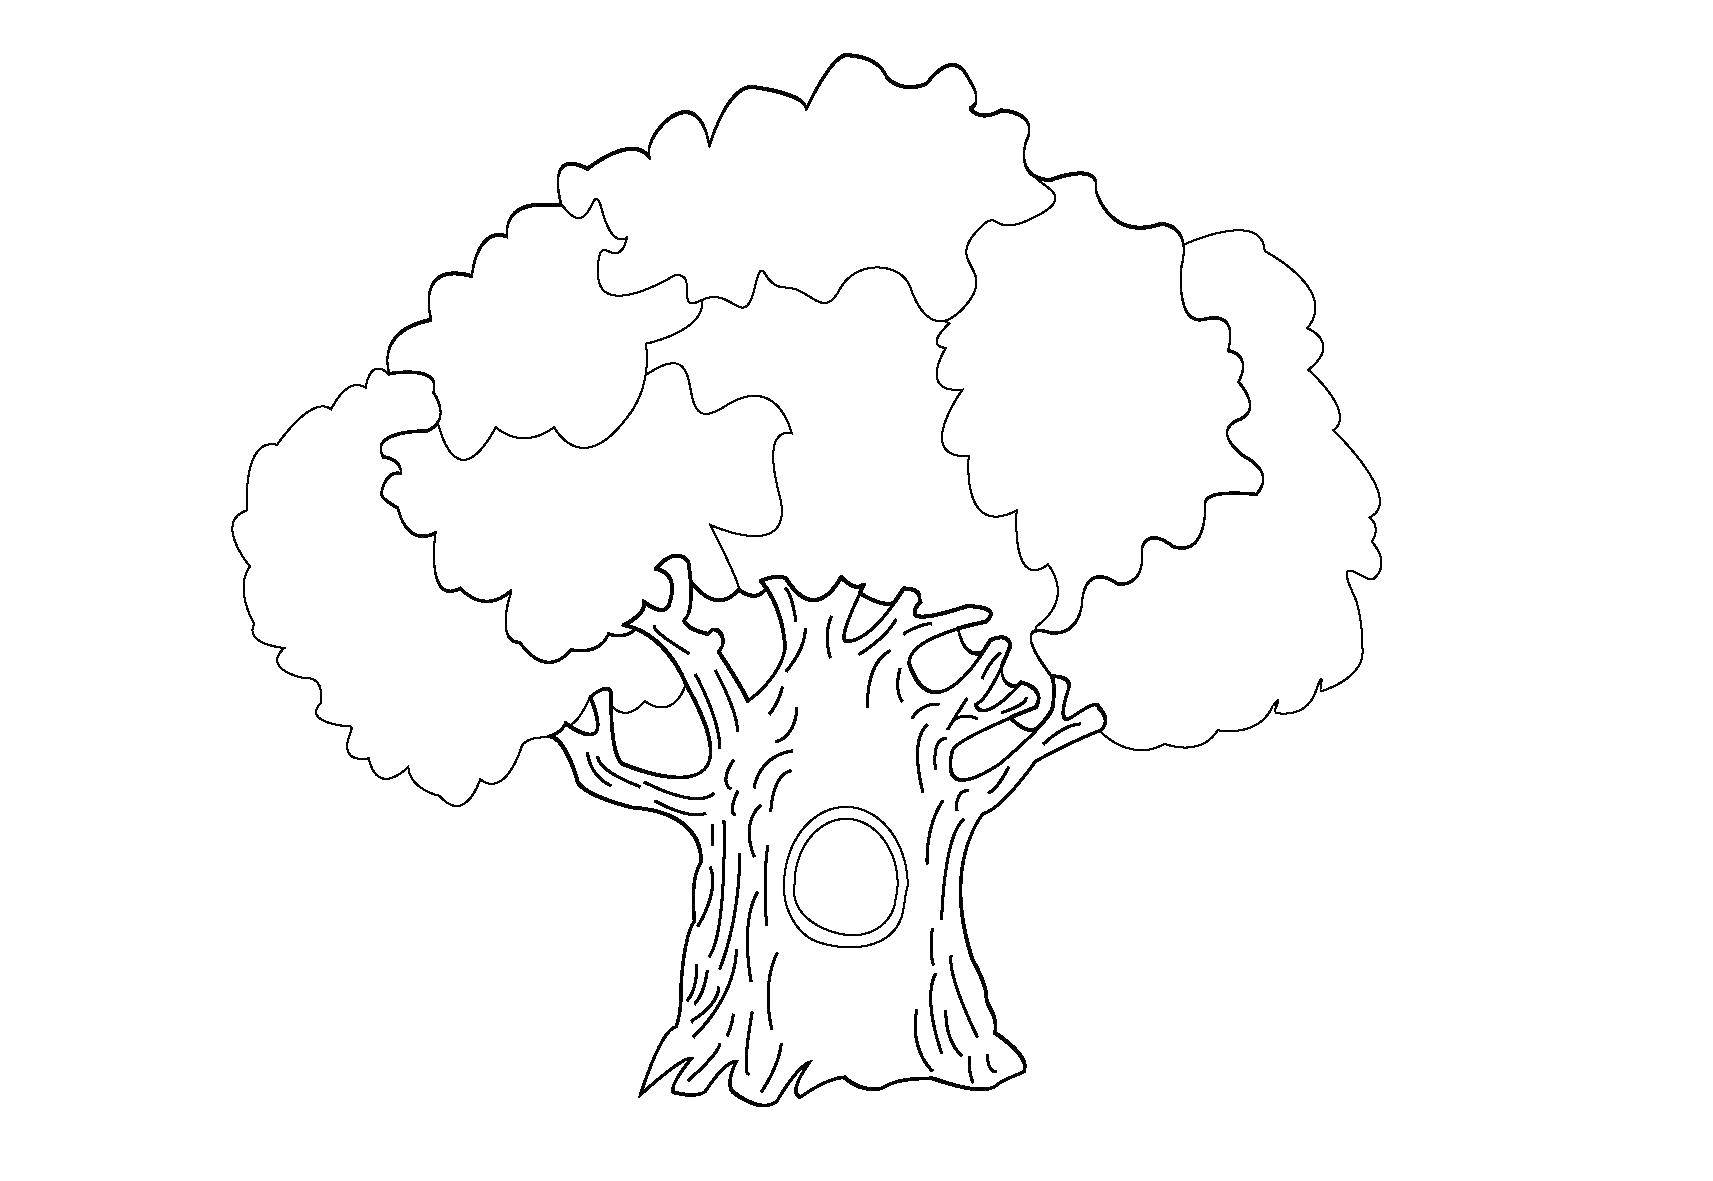 Coloring A tree with a hollow. Category tree. Tags:  Trees, leaf.